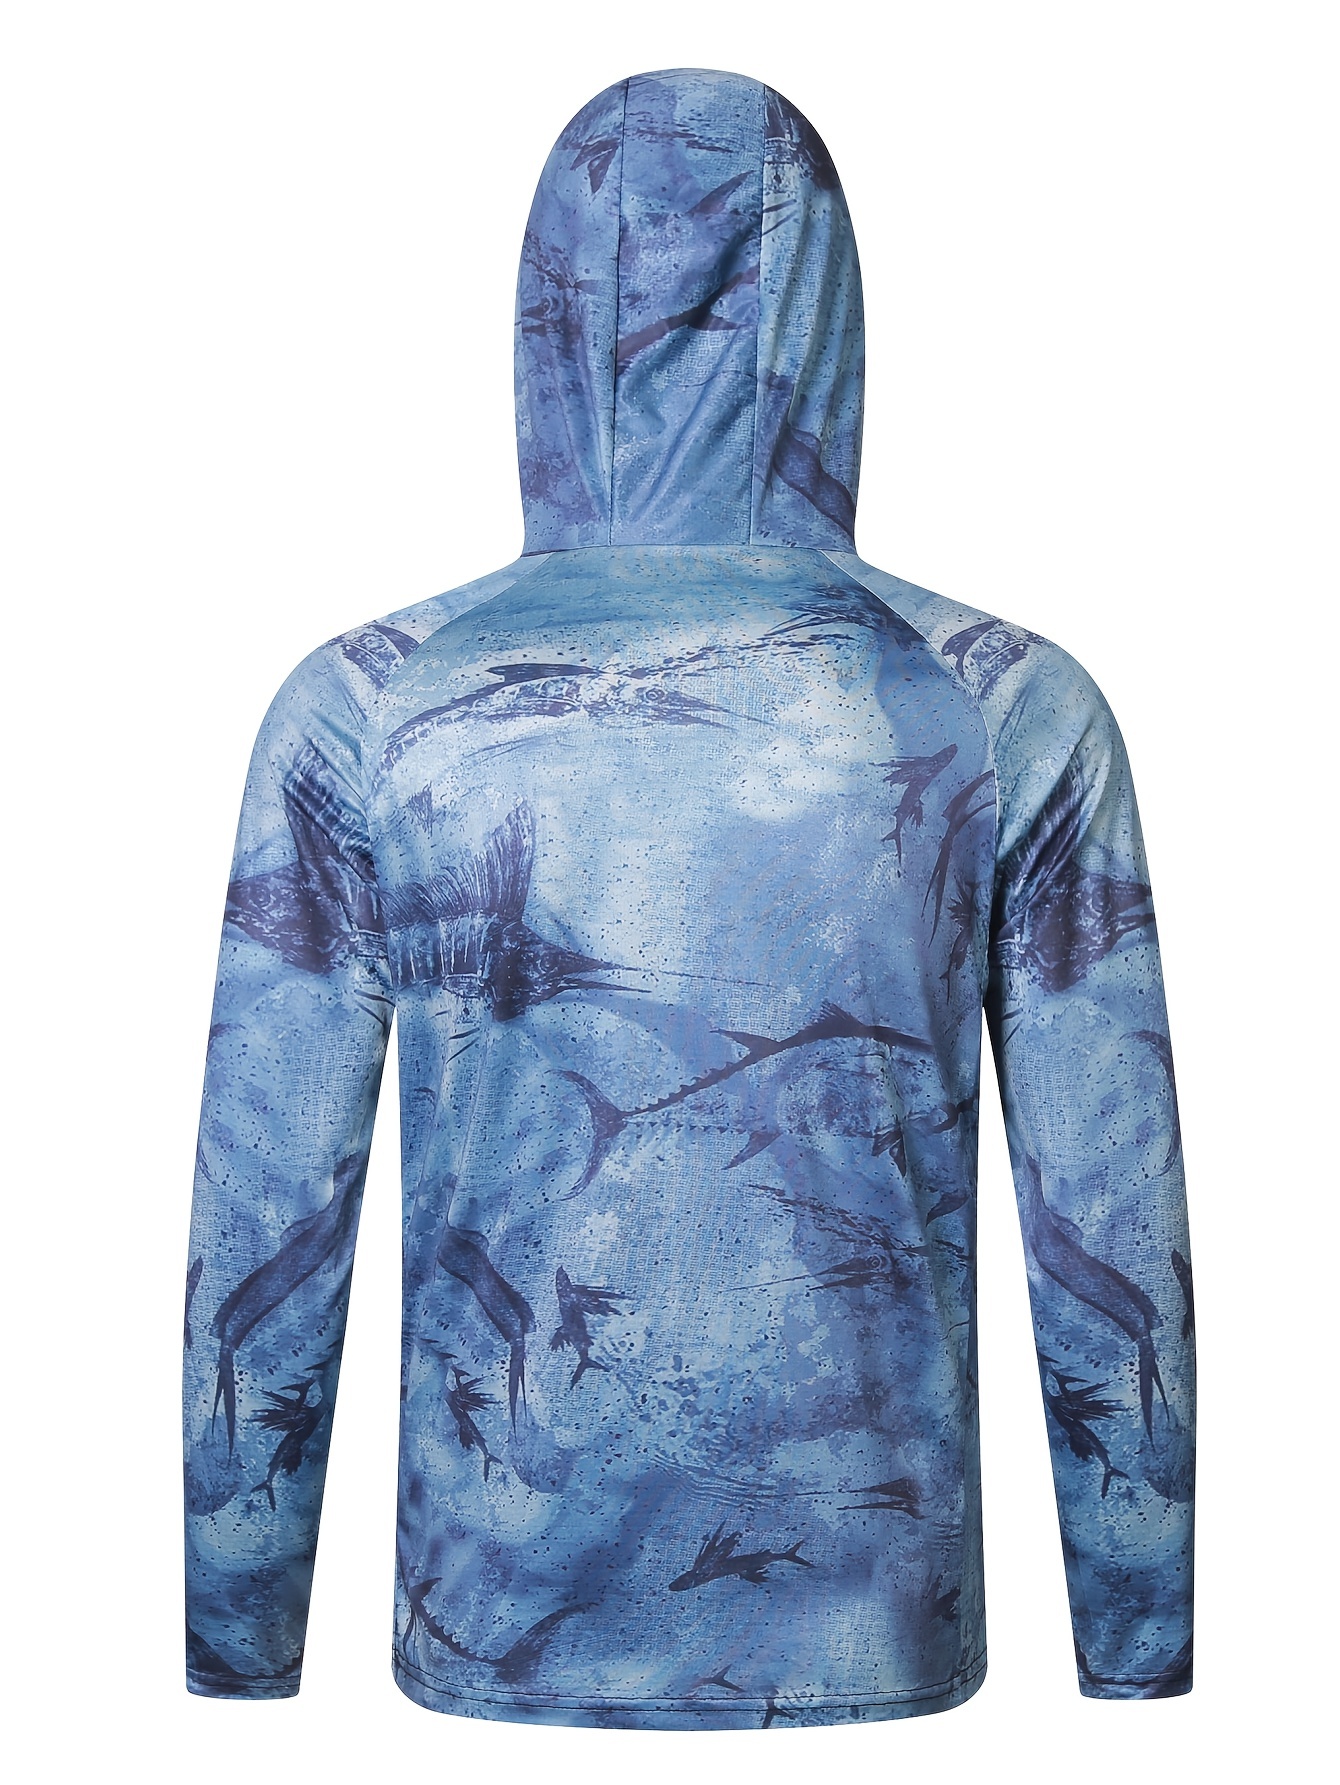 Men's UPF 50+ Sun Protection Hooded Shirt with Mask, Active Swordfish Print Quick Dry Slightly Stretch Long Sleeve Rash Guard for Fishing Hiking